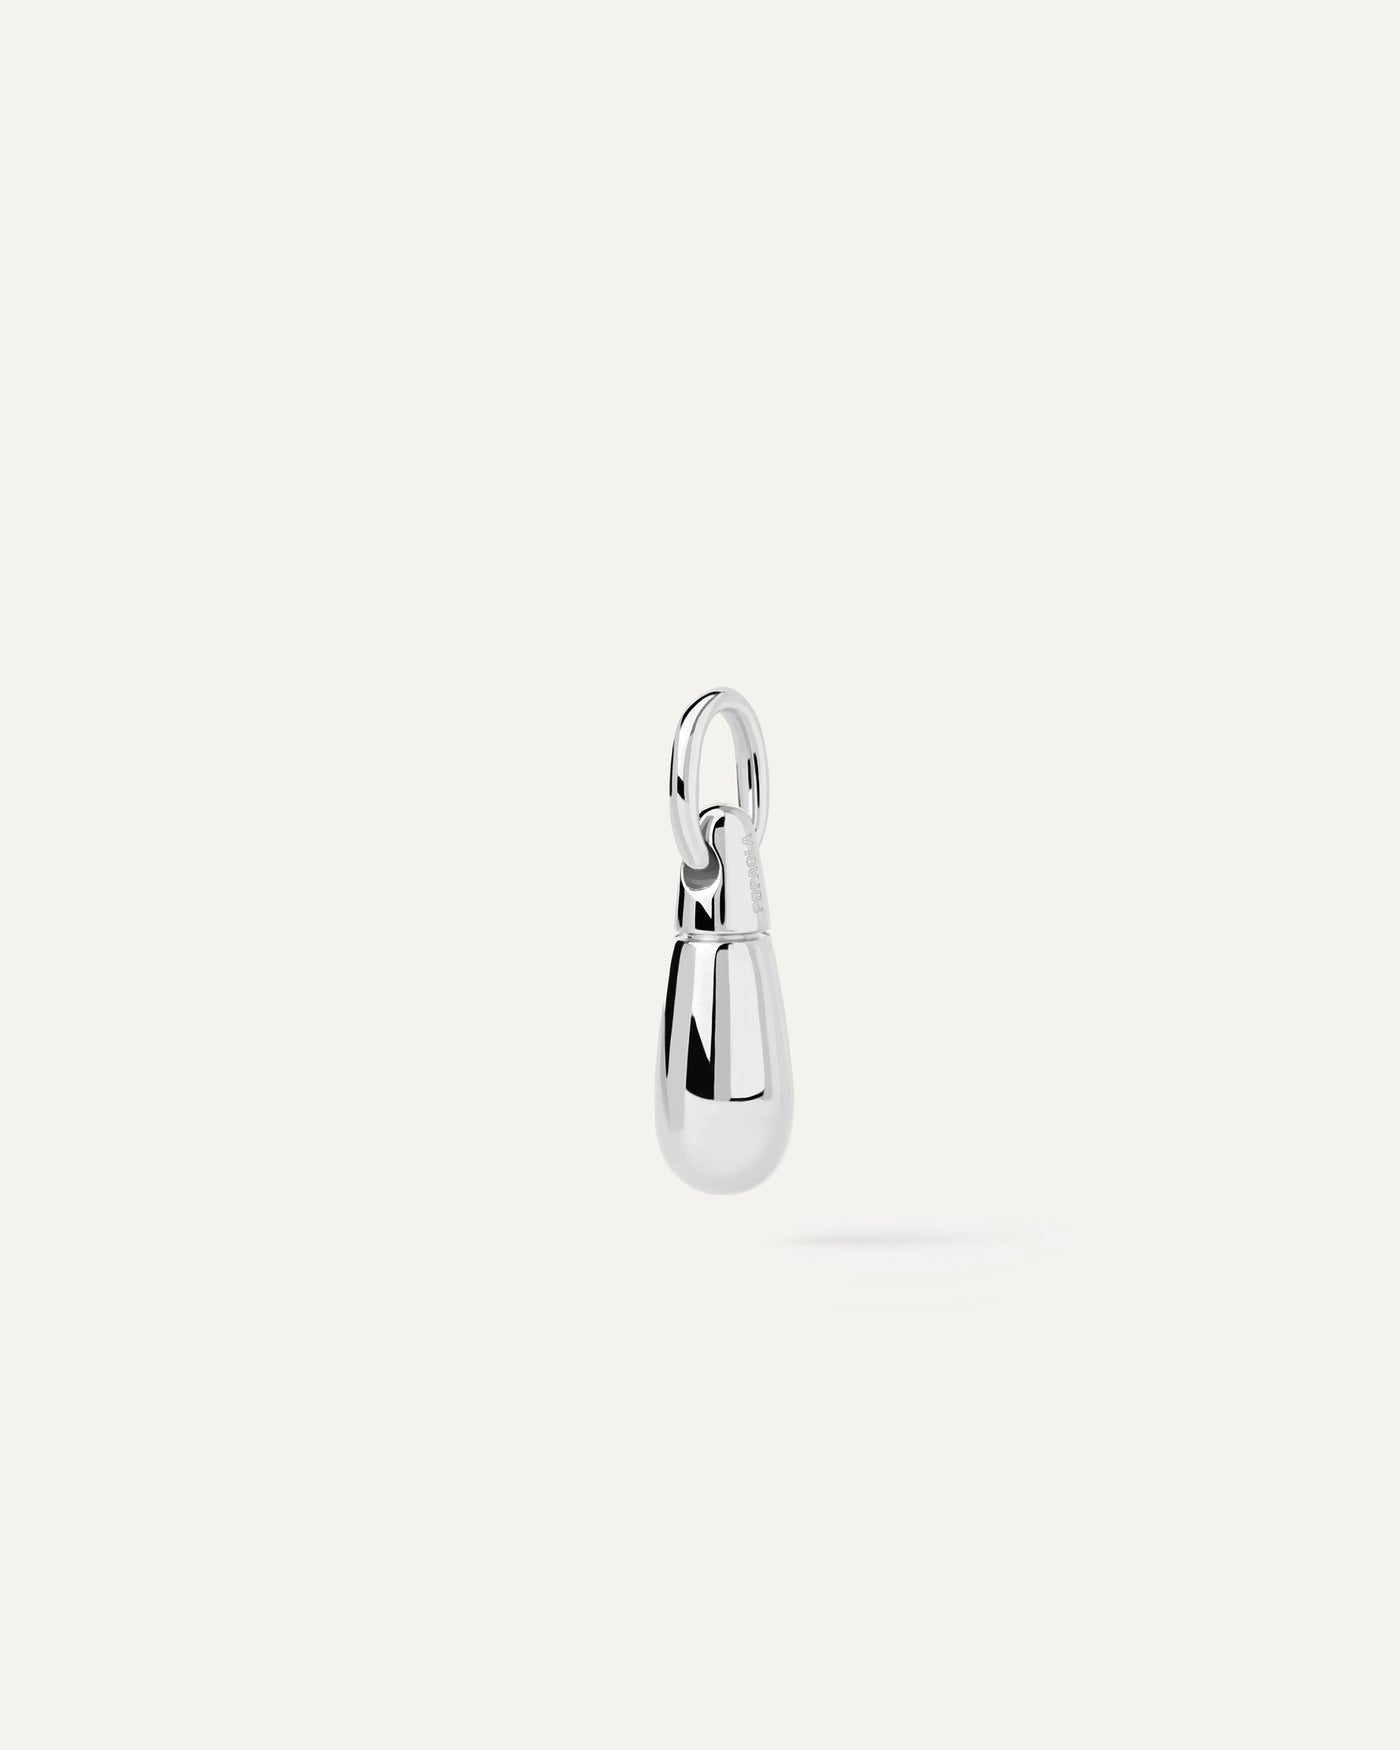 2023 Selection | Drop Silver Pendant. Get the latest arrival from PDPAOLA. Place your order safely and get this Best Seller. Free Shipping.